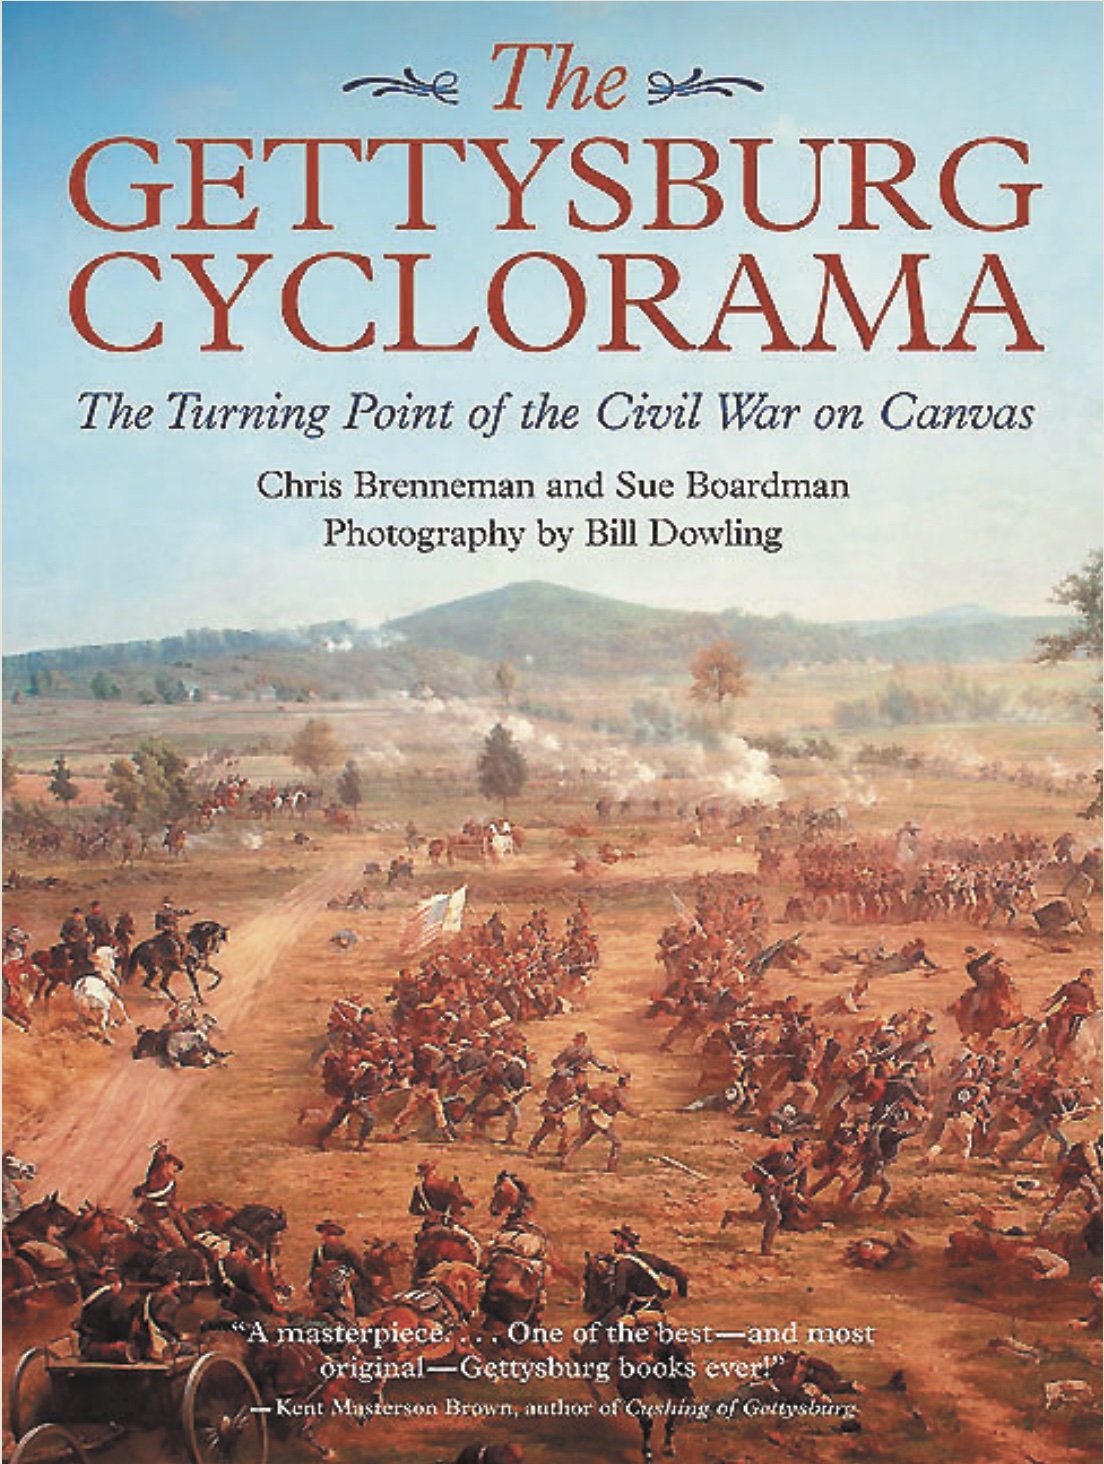 “The Gettysburg Cyclorama: The Turning Point of the
Civil War on Canvas” by Chris Brenneman and Sue Boardman
(Savas Beatie, 2015).